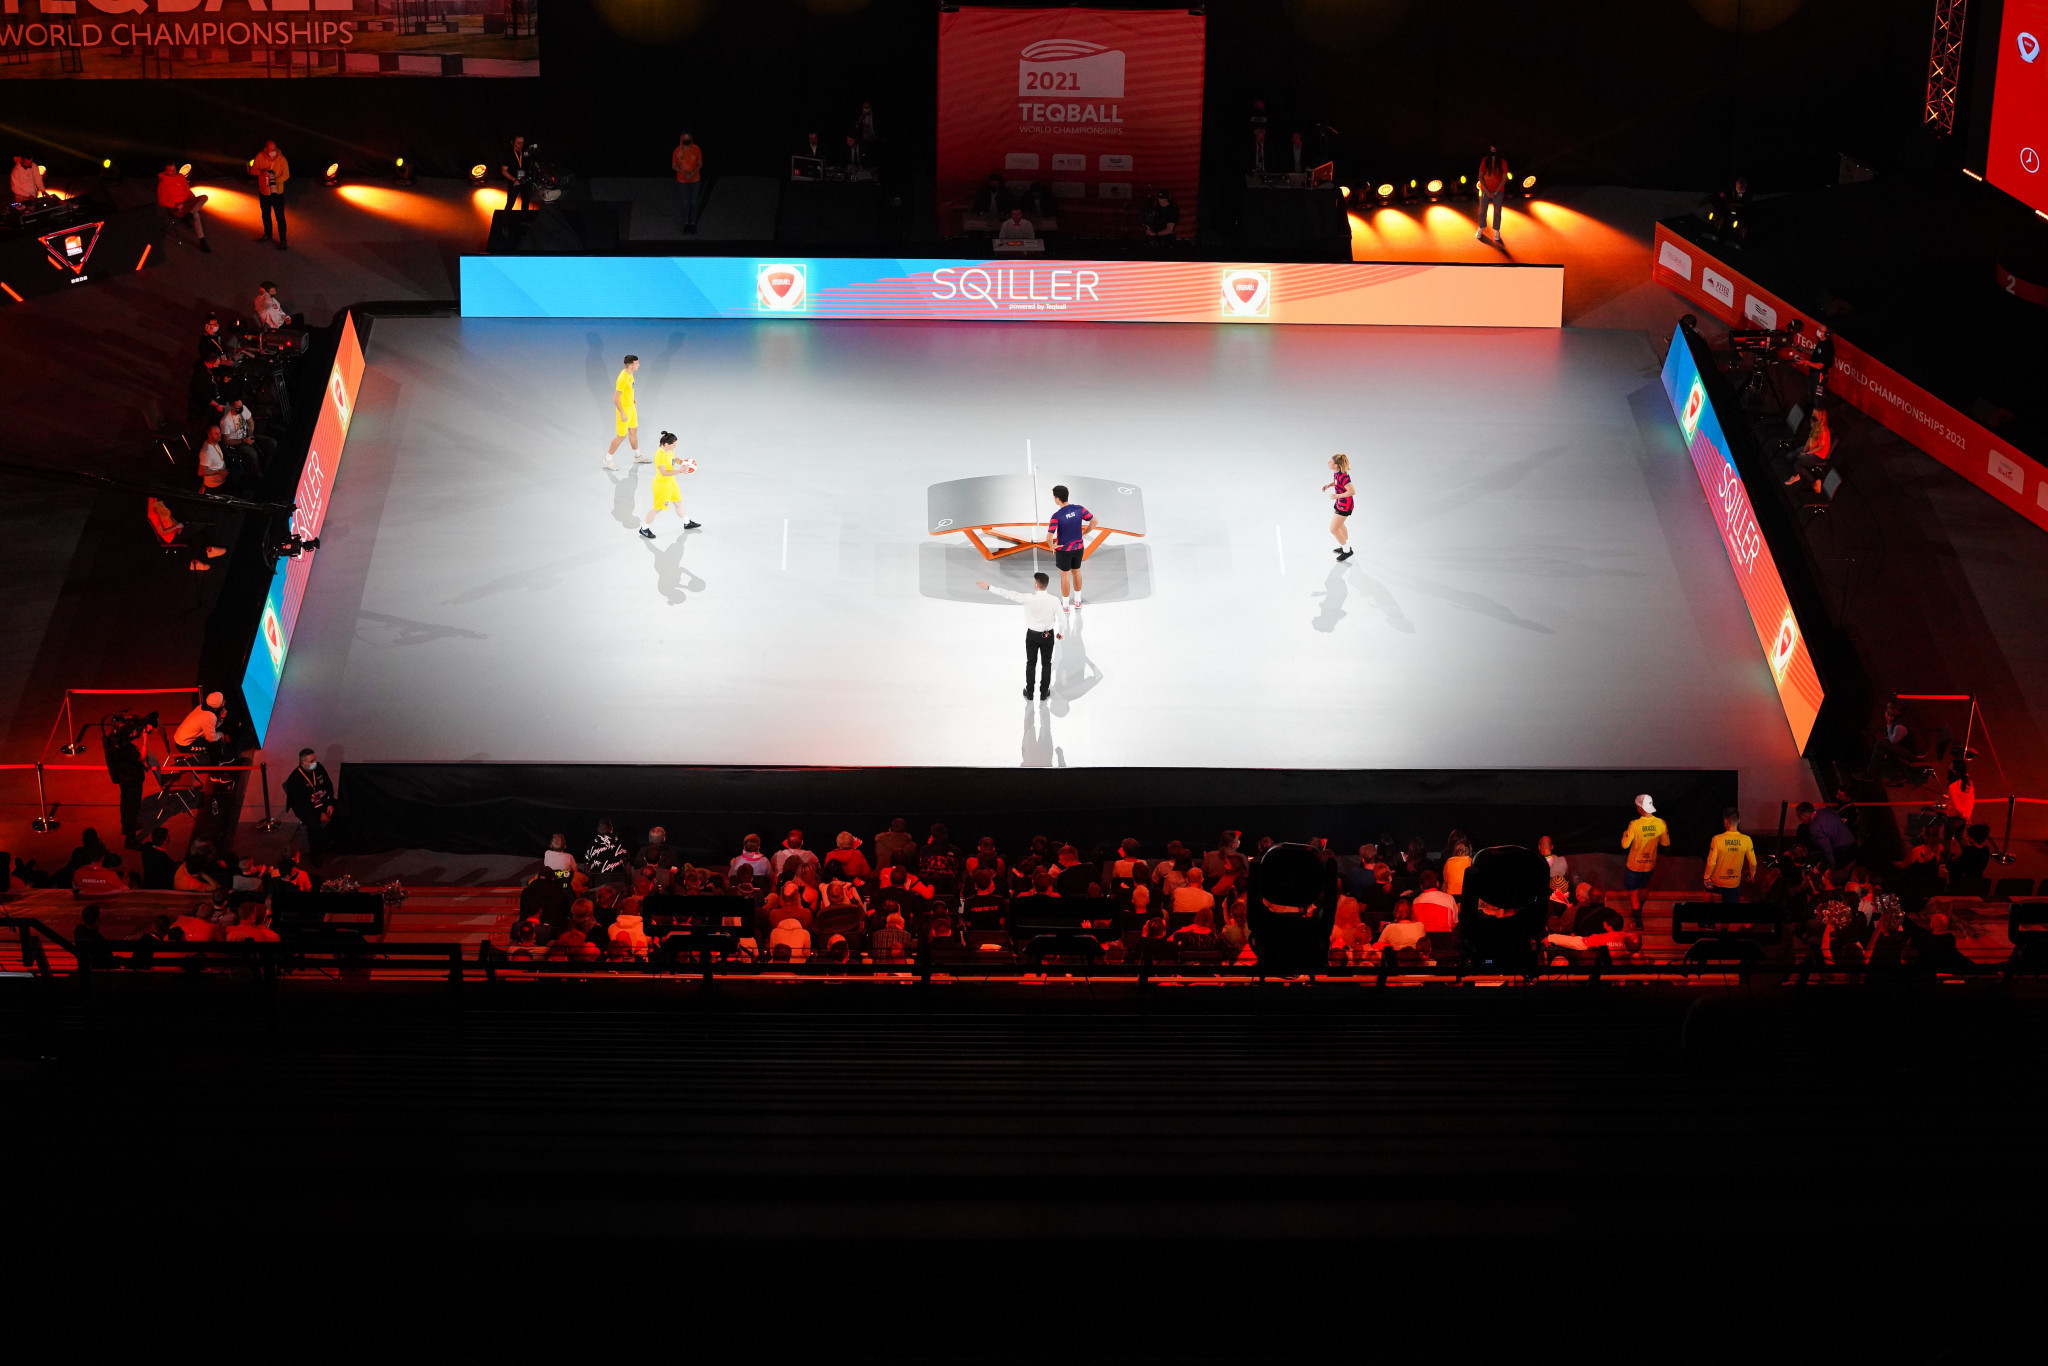 The 2022 Teqball World Championships happened last month in Nuremberg ©FITEQ